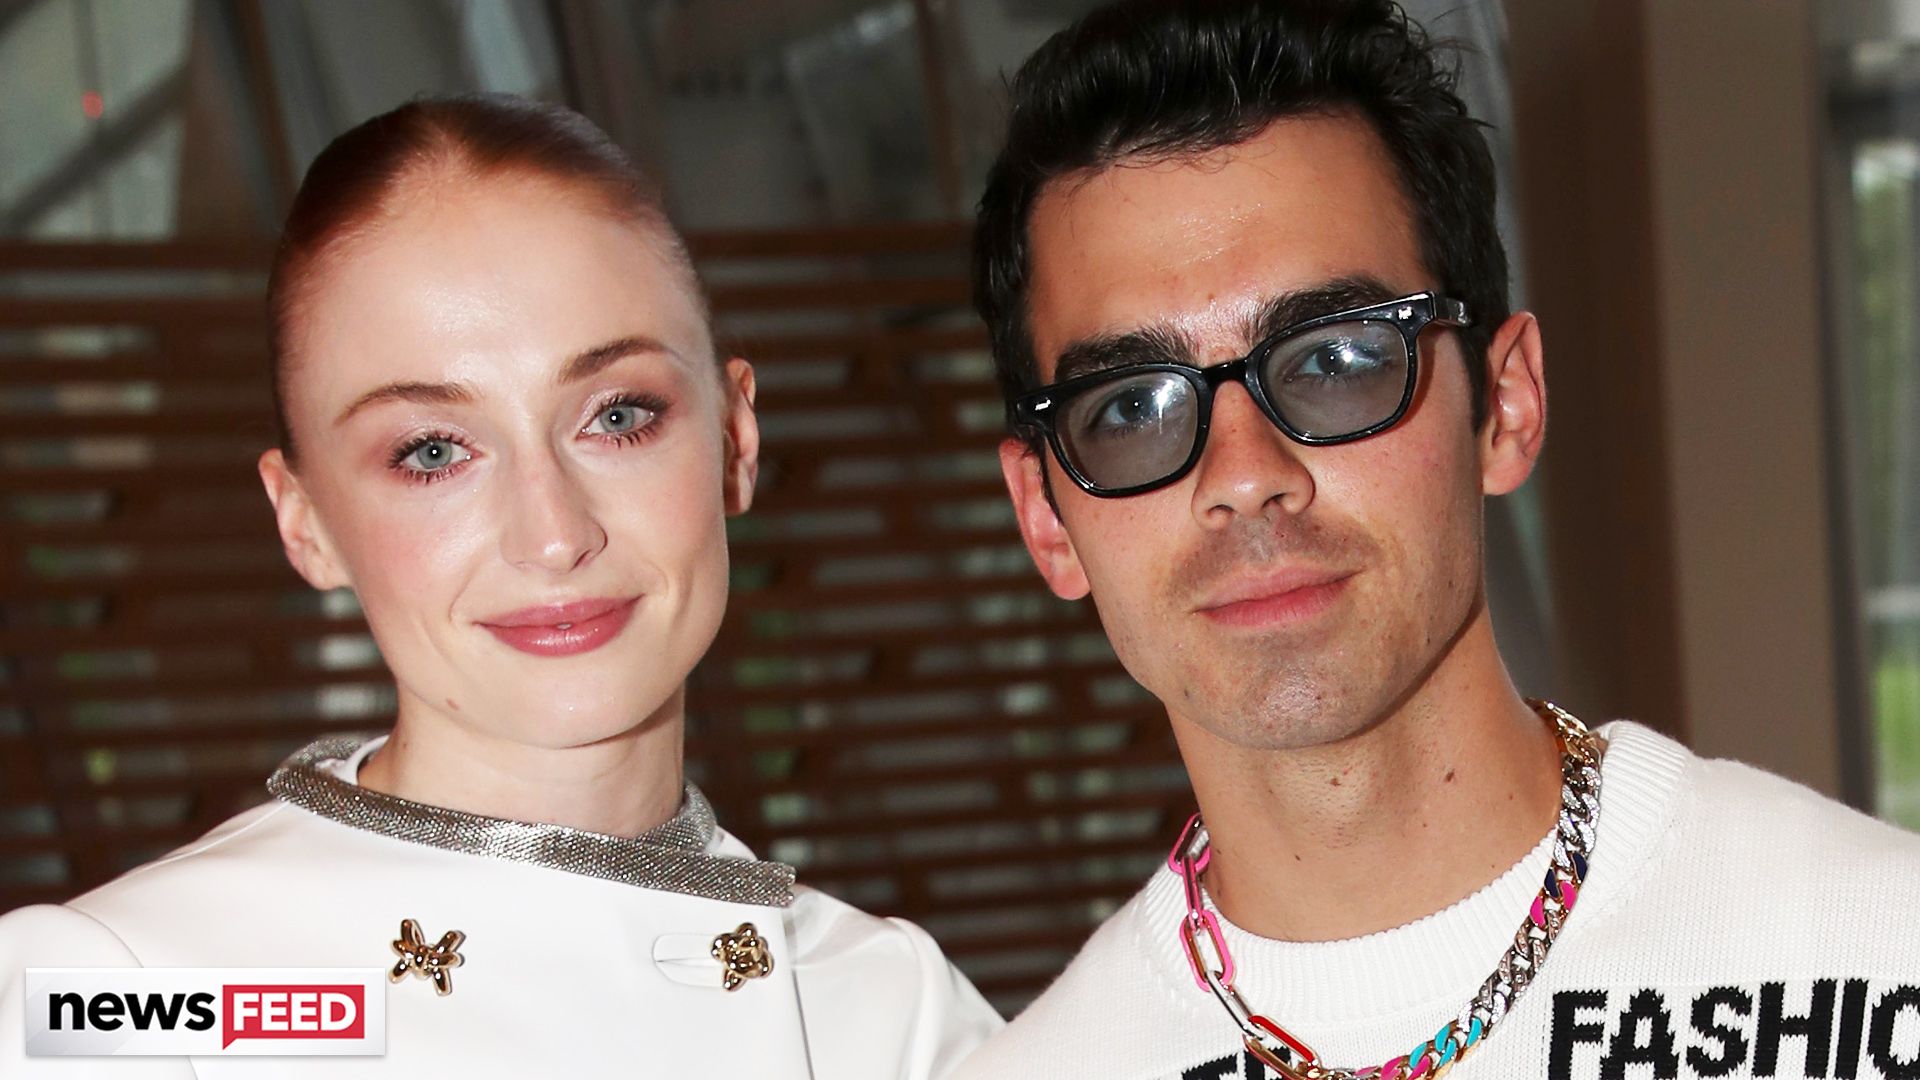 Sophie Turner's Baby Bump Looking Bigger While Shopping with Joe Jonas